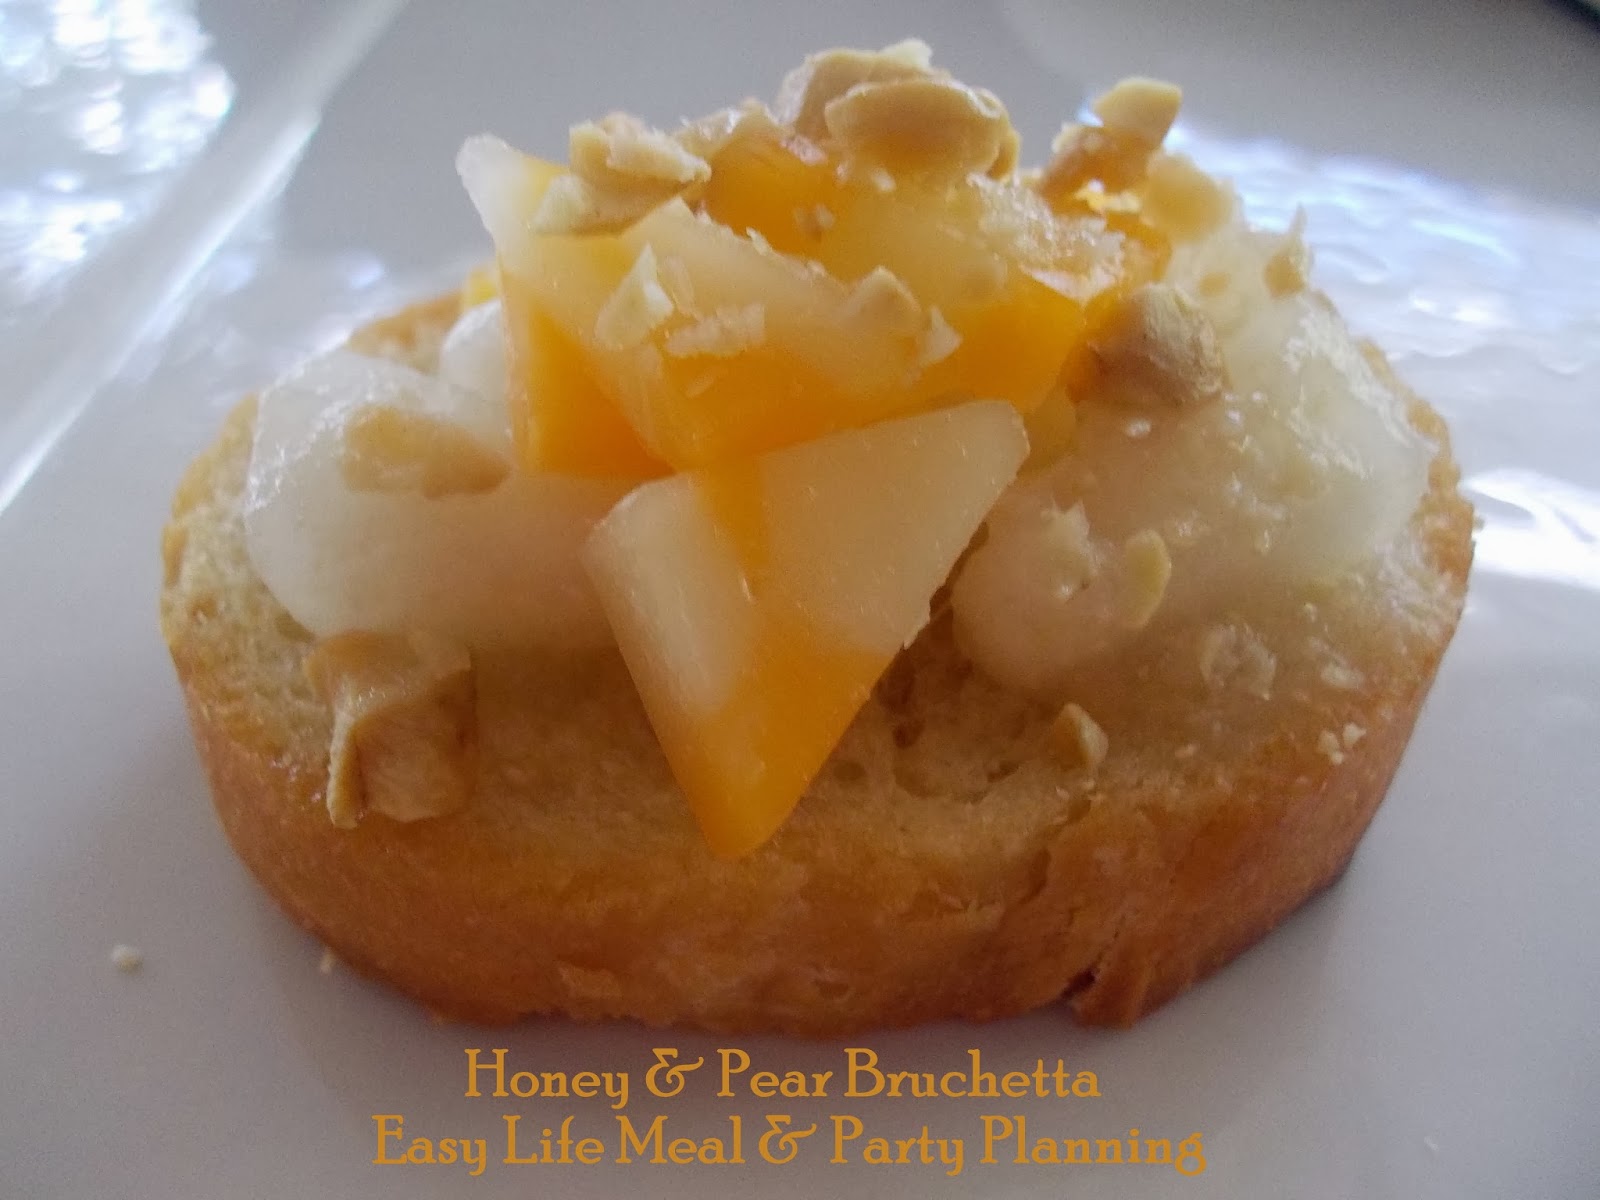 Honey & Pear Bruschetta: Easy Lief Meal & Party Planning